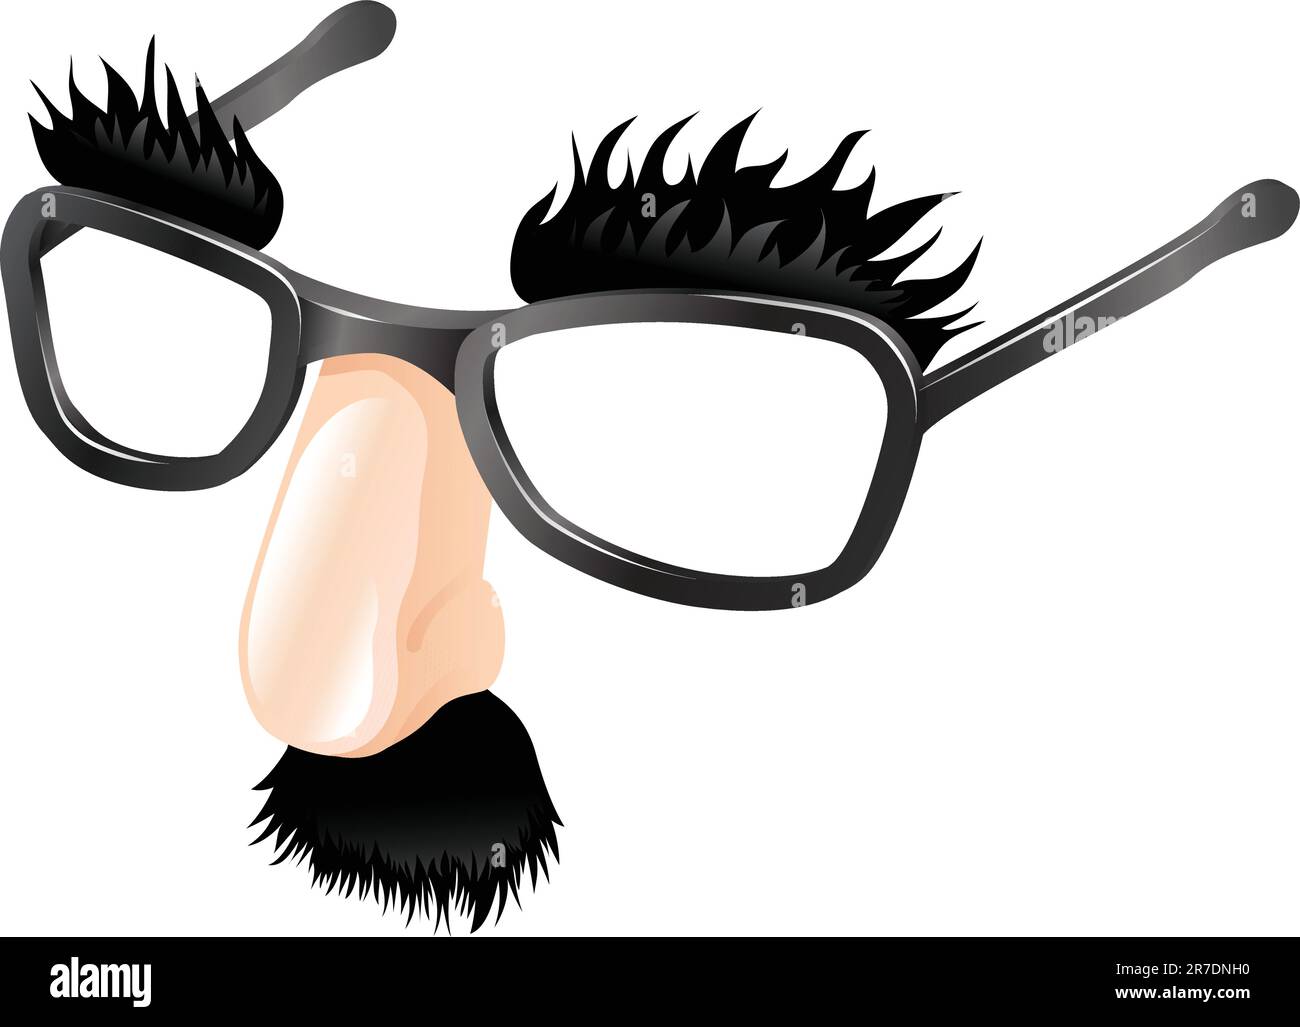 Funny disguise, comedy  fake nose moustache, eyebrows and glasses. Stock Vector